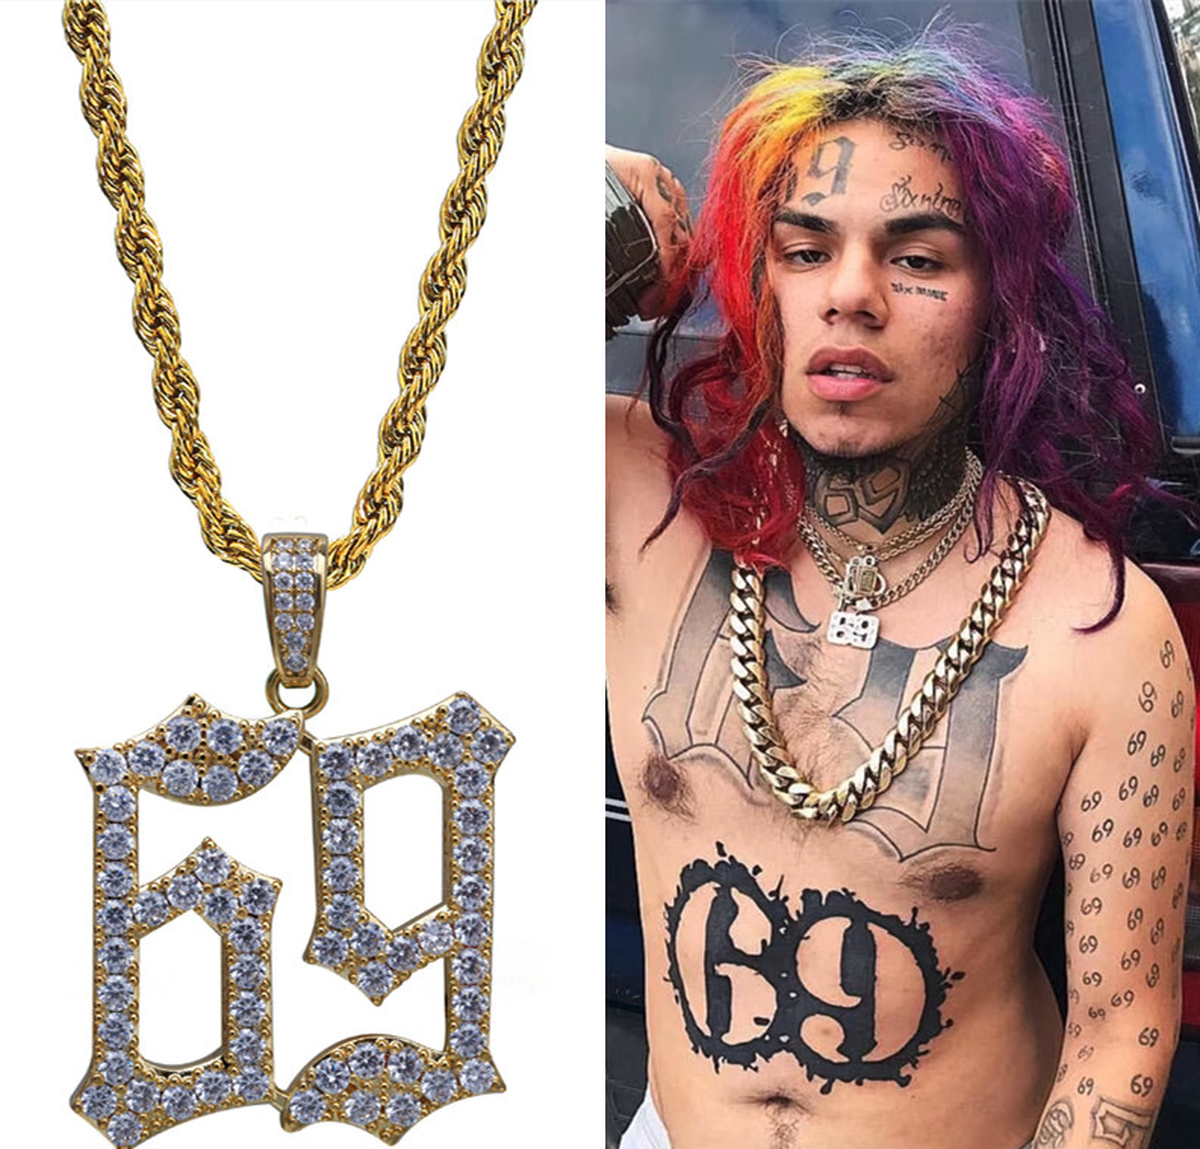 6ix9ine風 ネックレス Hip Hop ヒップホップ ラッパー ブリンブリン ペンダント チェーン アイス Dress Class Or Die As A Loser